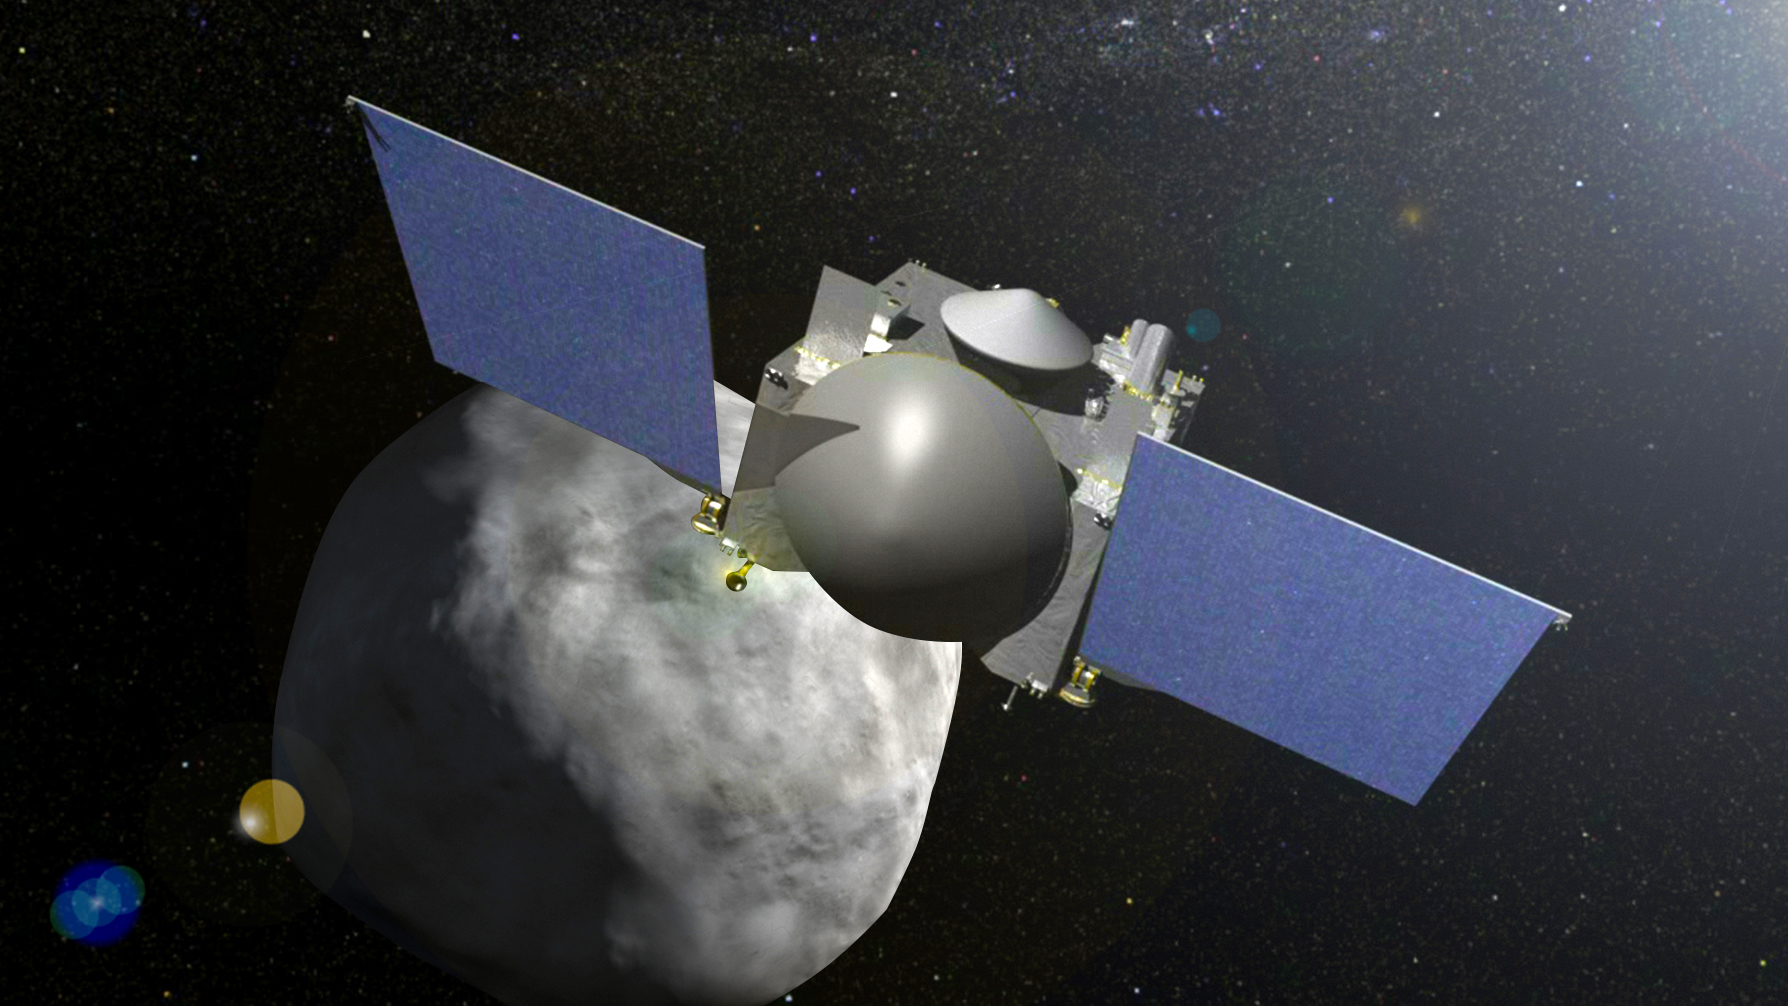 This narrated video provides an overiew of the OSIRIS-REx mission to observe asteroid Bennu and retreive a sample for study on Earth.For complete transcript, click here.